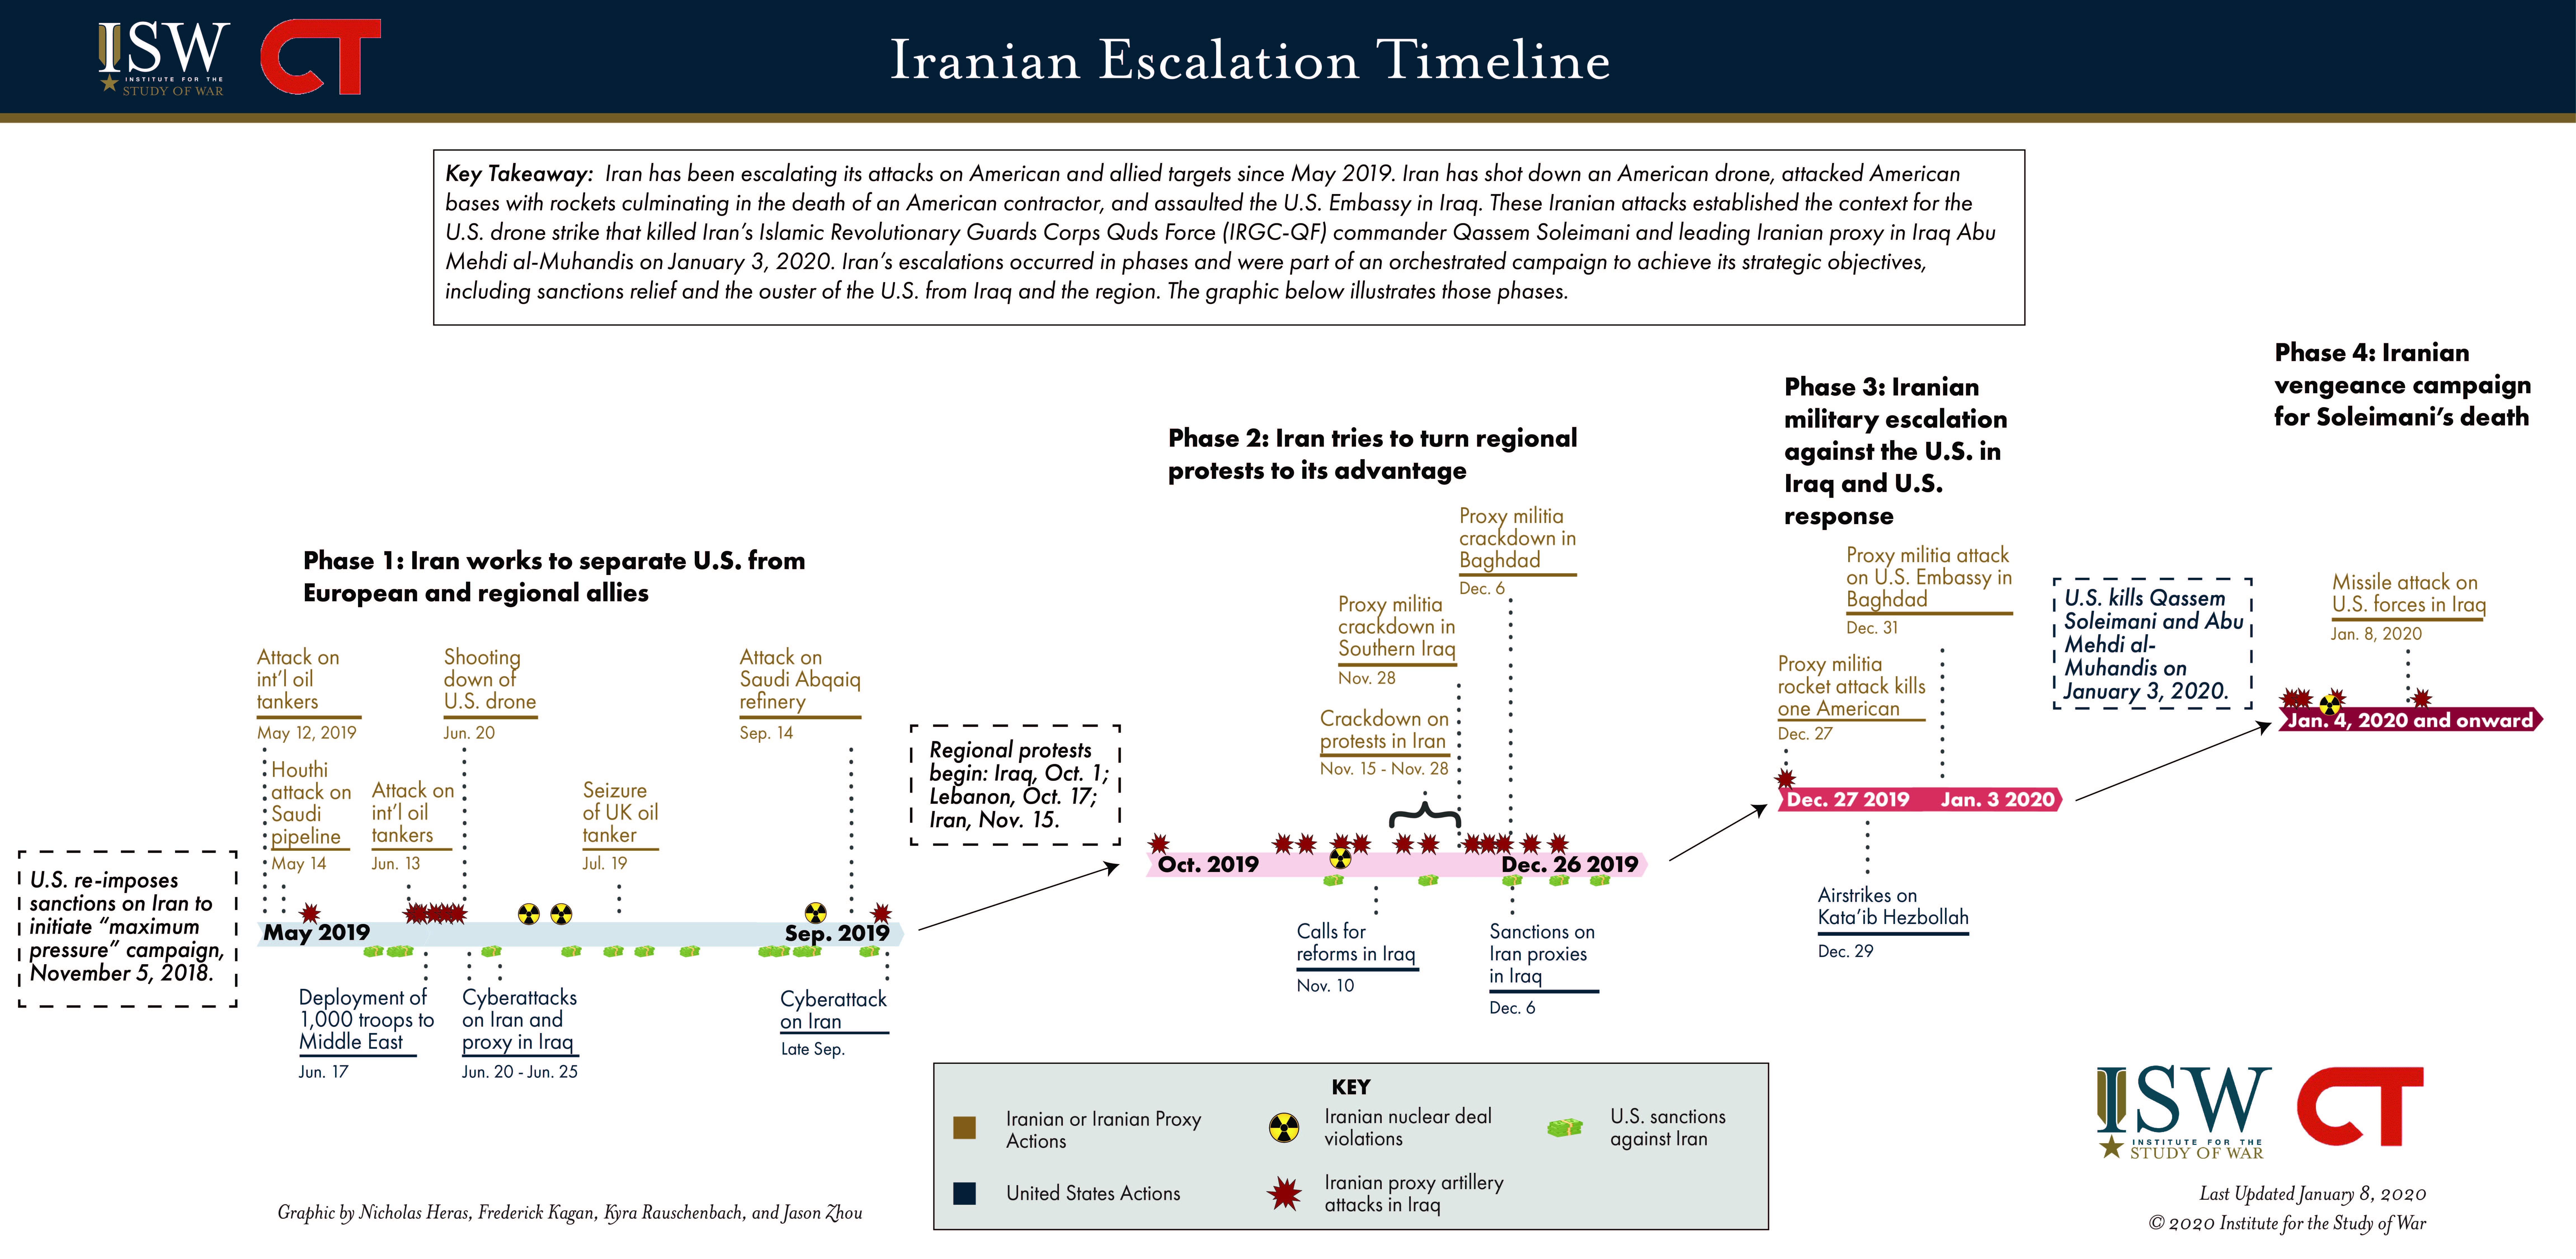 Iran Escalation Timeline via The Institute for the Study of War (ISW).